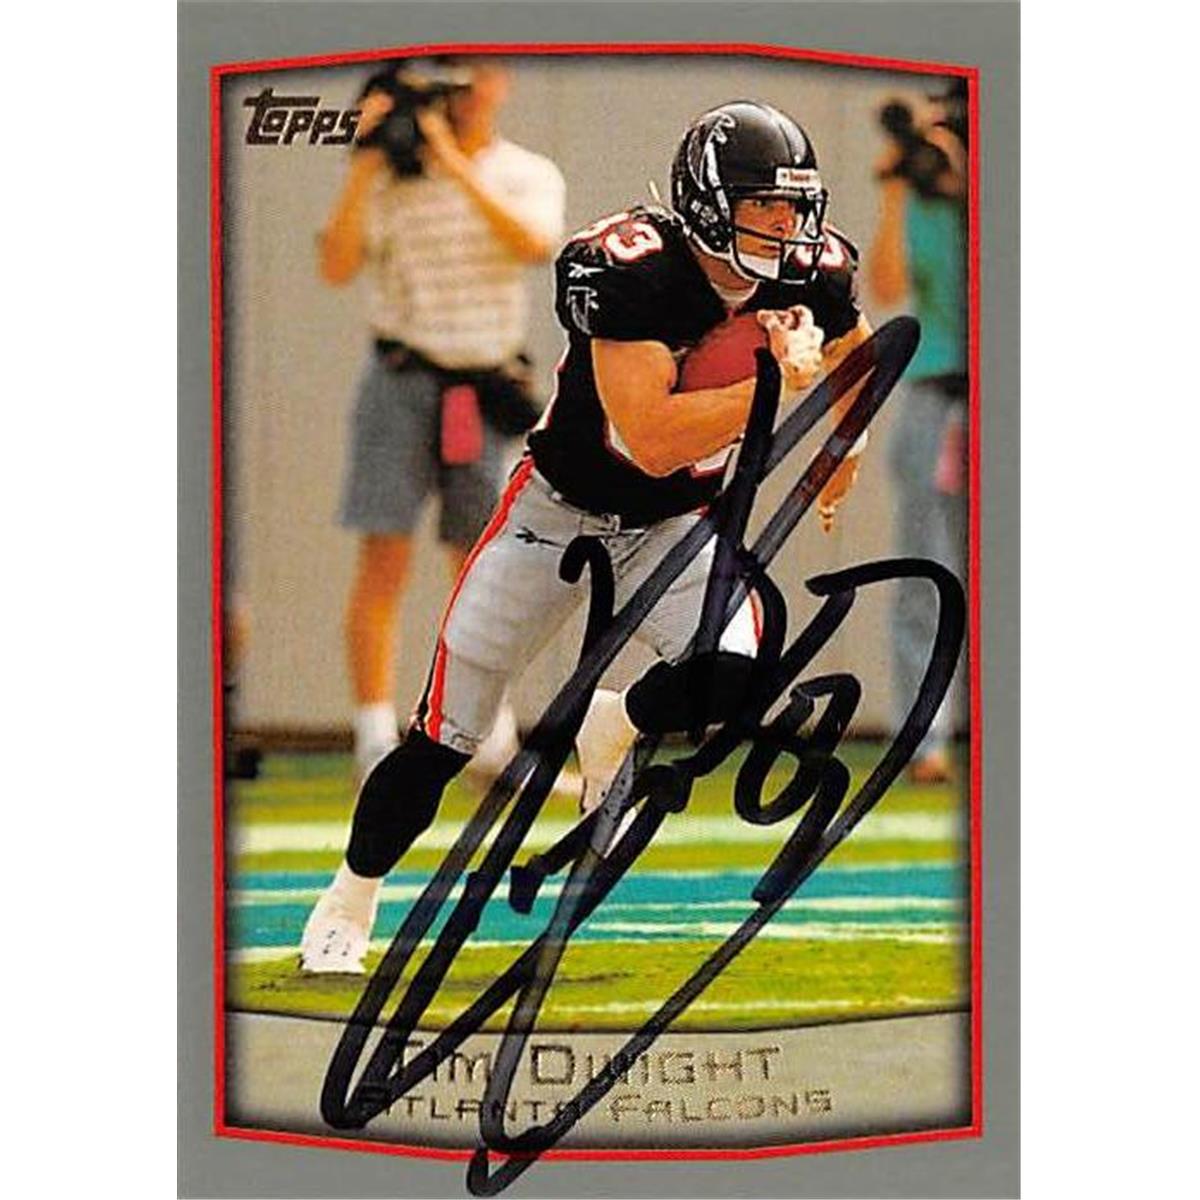 Picture of Autograph Warehouse 366651 Tim Dwight Autographed Football Card - Atlanta Falcons 1999 Topps No.58